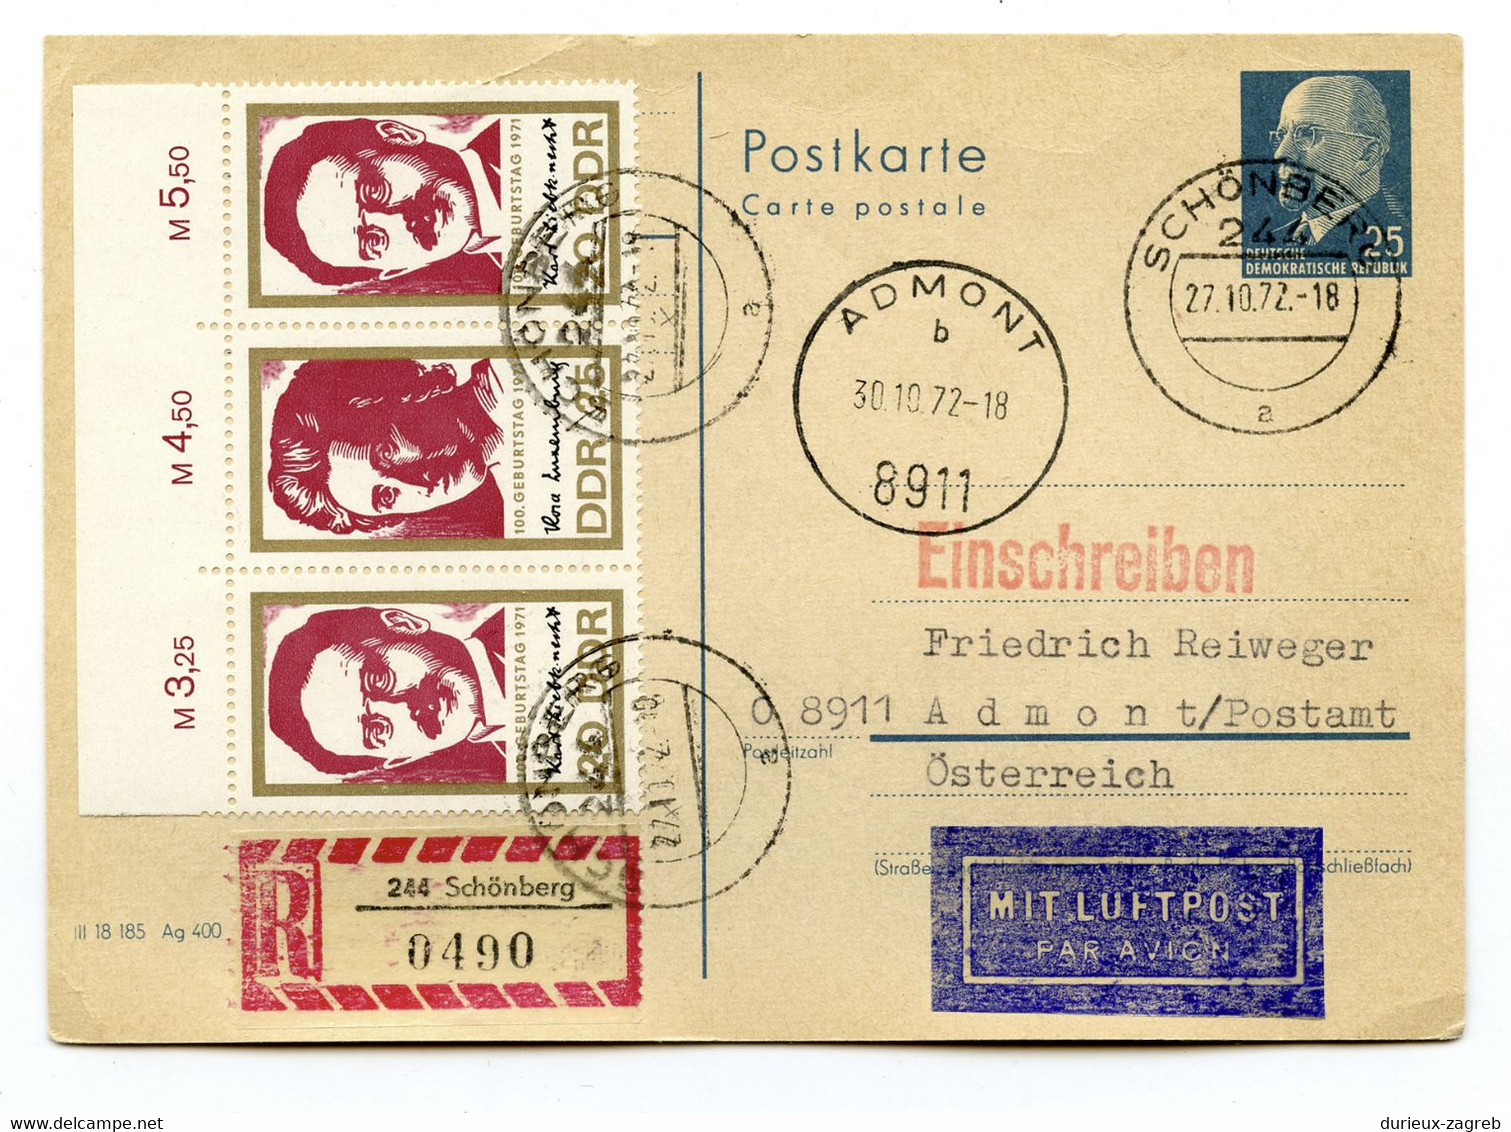 Germany DDR Postal Stationery Postcard Posted Registered Air Mail 1972 Schönberg To Admont - Uprated B230205 - Postcards - Used